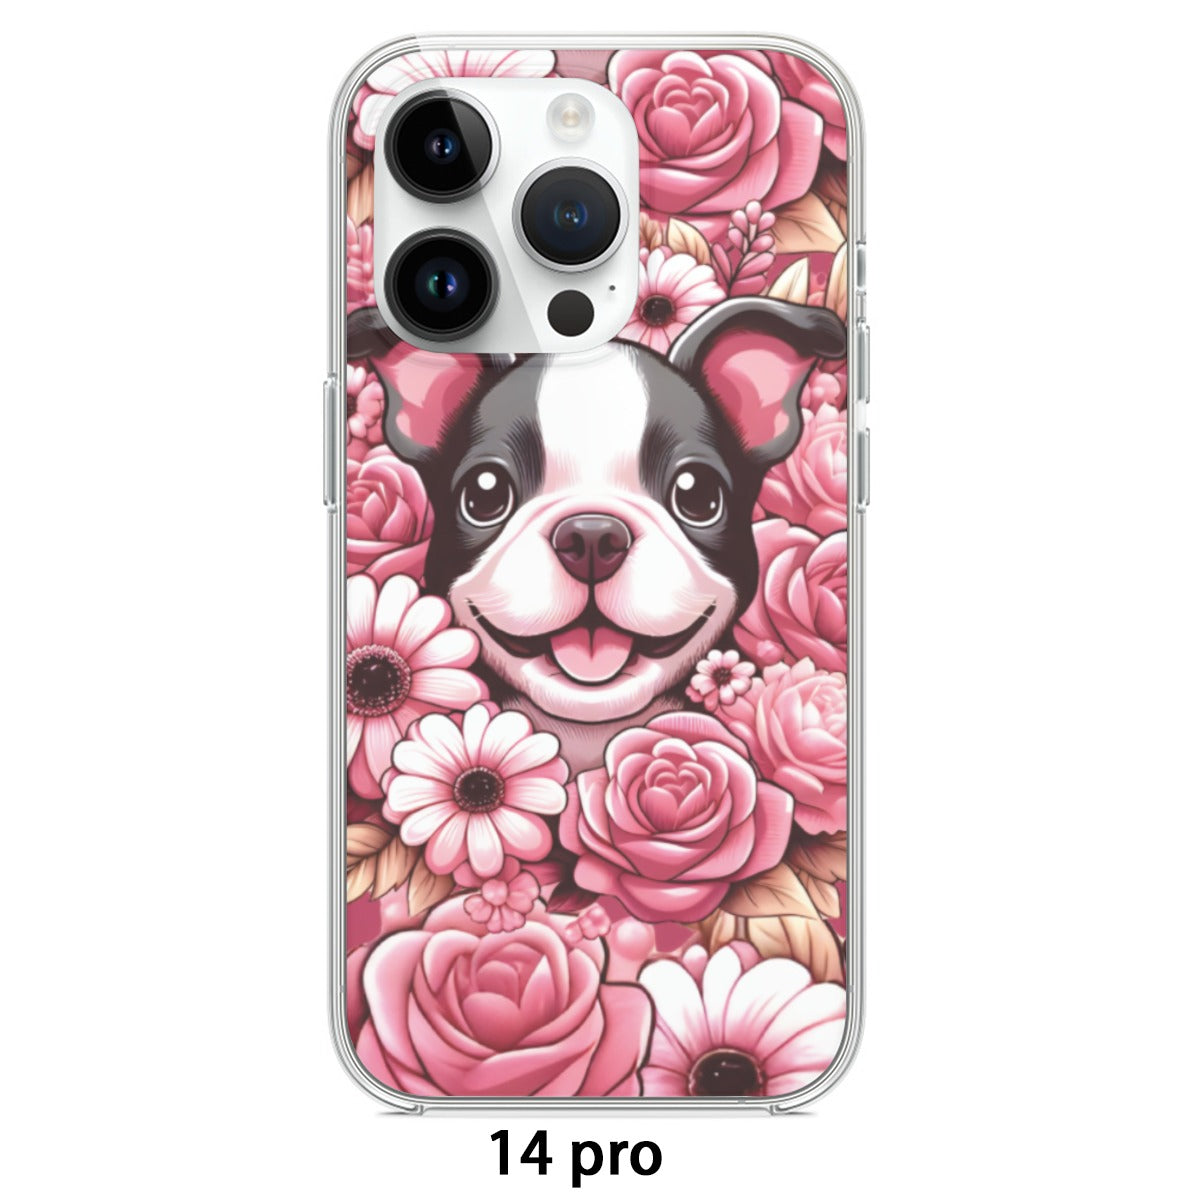 Daisy - iPhone case for Boston Terrier lovers